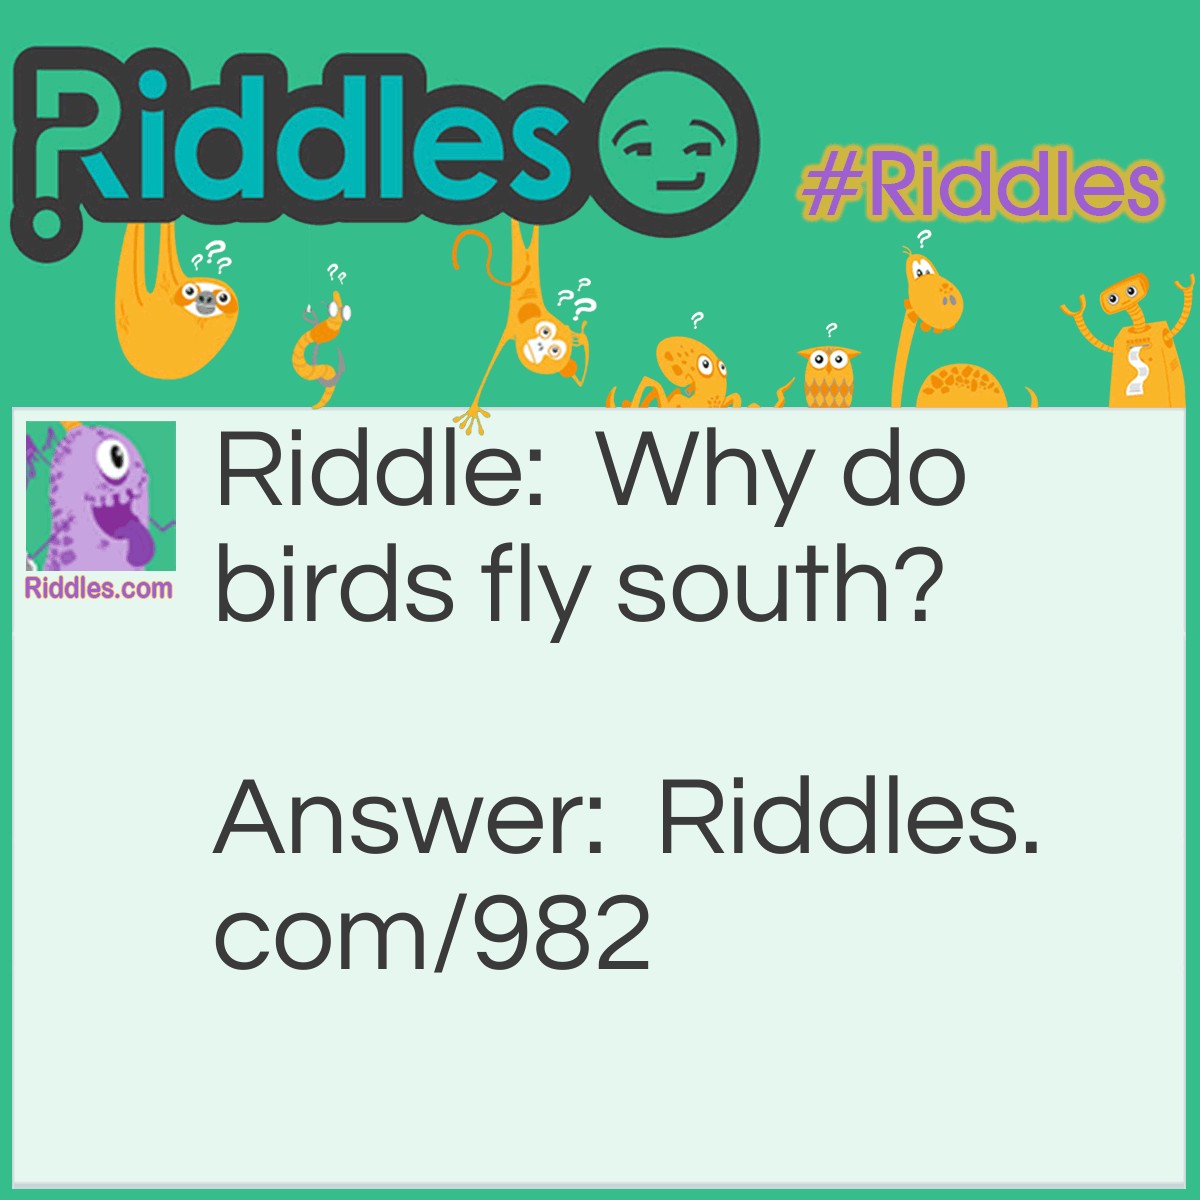 Riddle: Why do birds fly south? Answer: Because it's too far to walk.